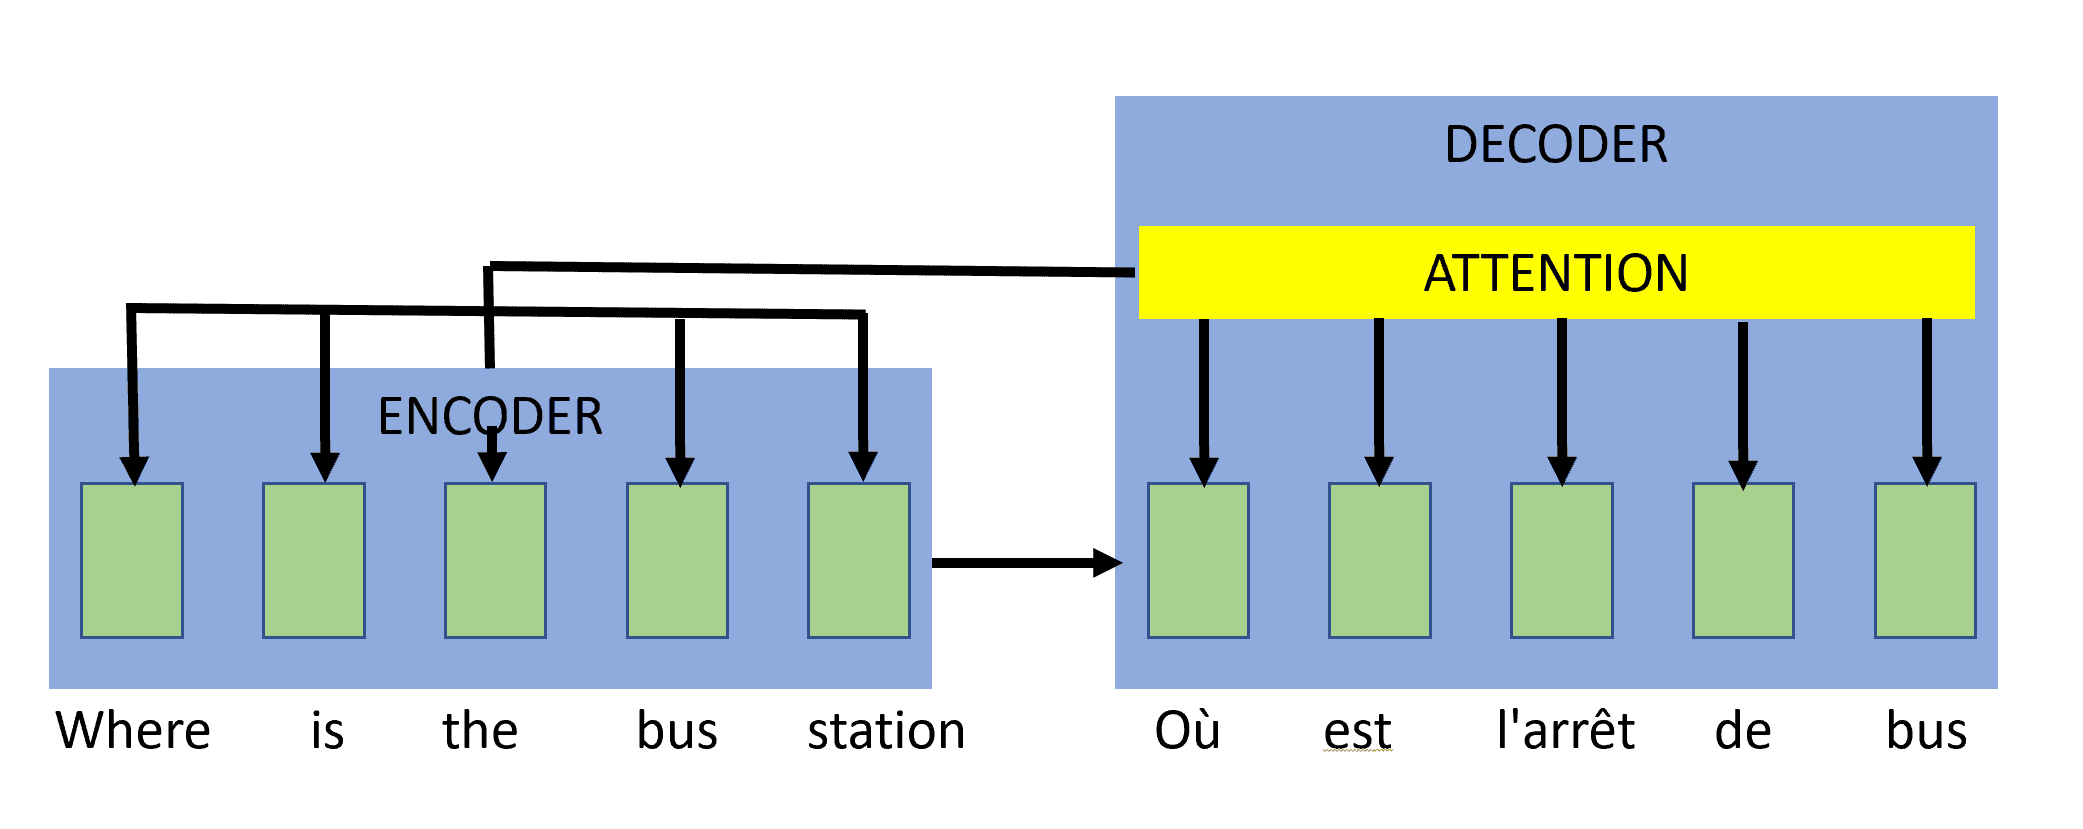 A different illustration of the encoder-decoder plus attention architecture for deep learning tutorial